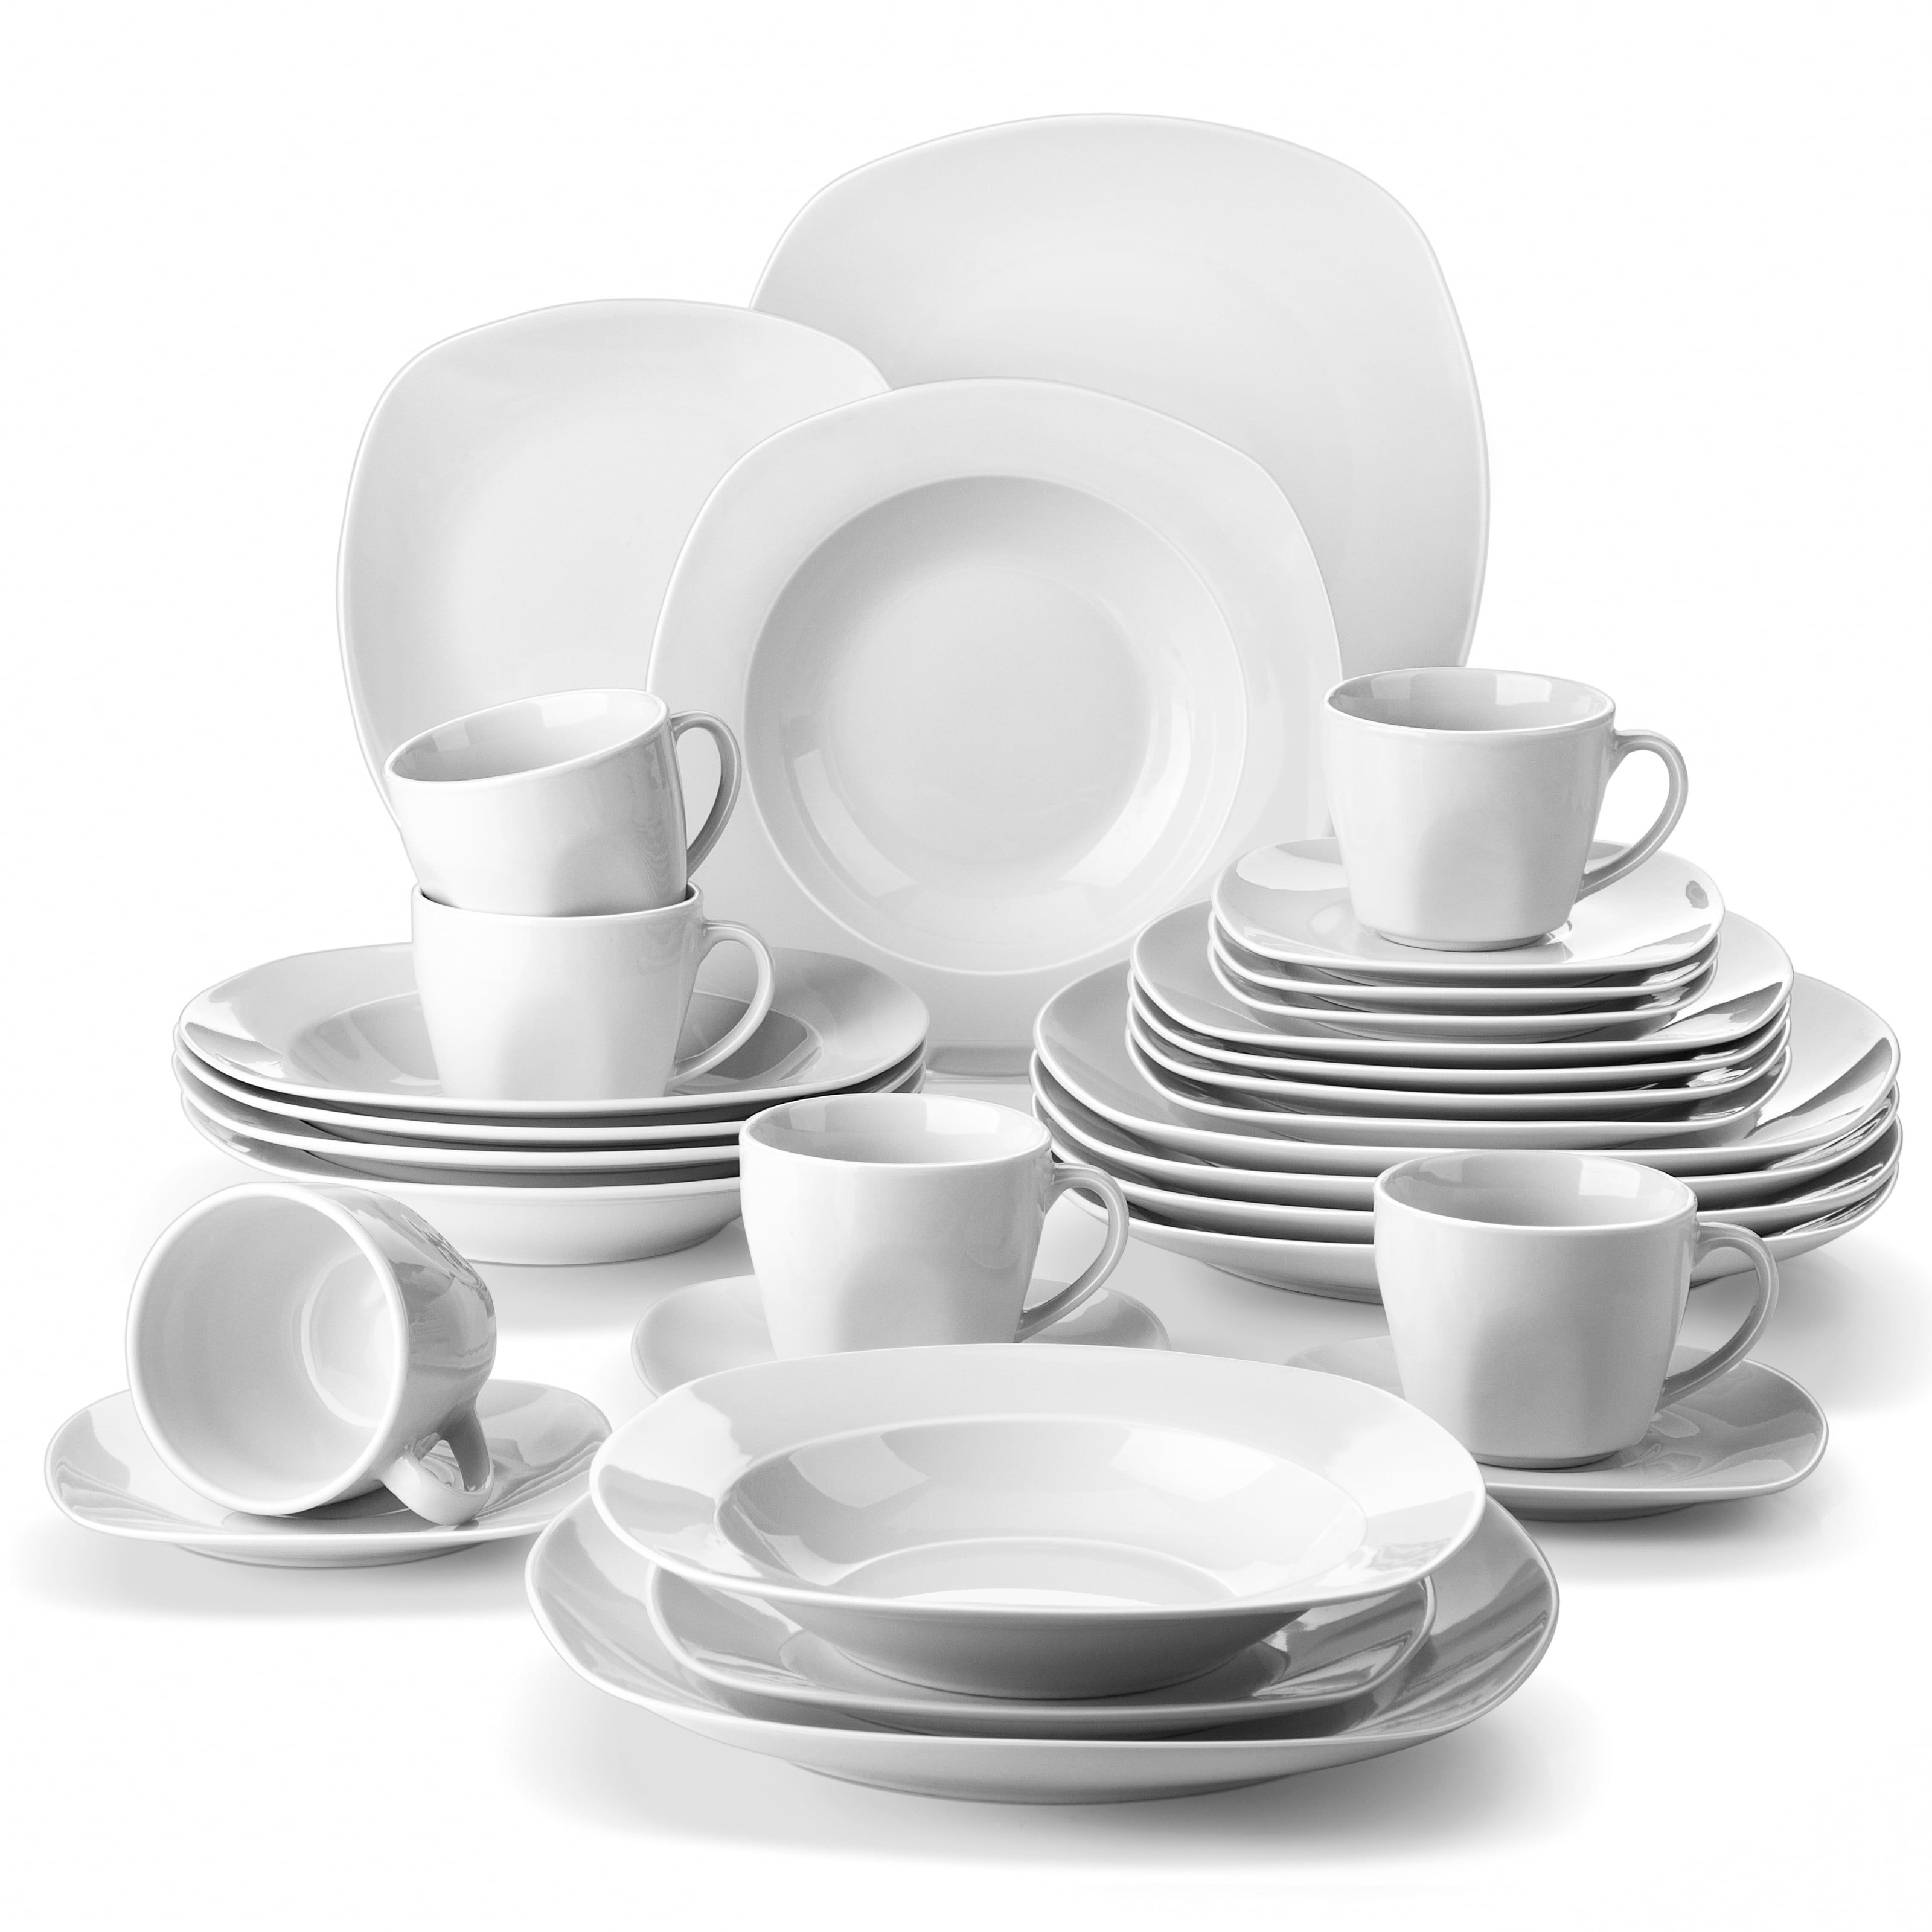 Service for 6 People 36-Piece Dinnerware Set with 6 x Cereal Bowls/Dinner Plates/Dessert Plates/Soup Plates/Cups/Saucers Series Blance Ideal Gift for Wedding New House Party MALACASA 